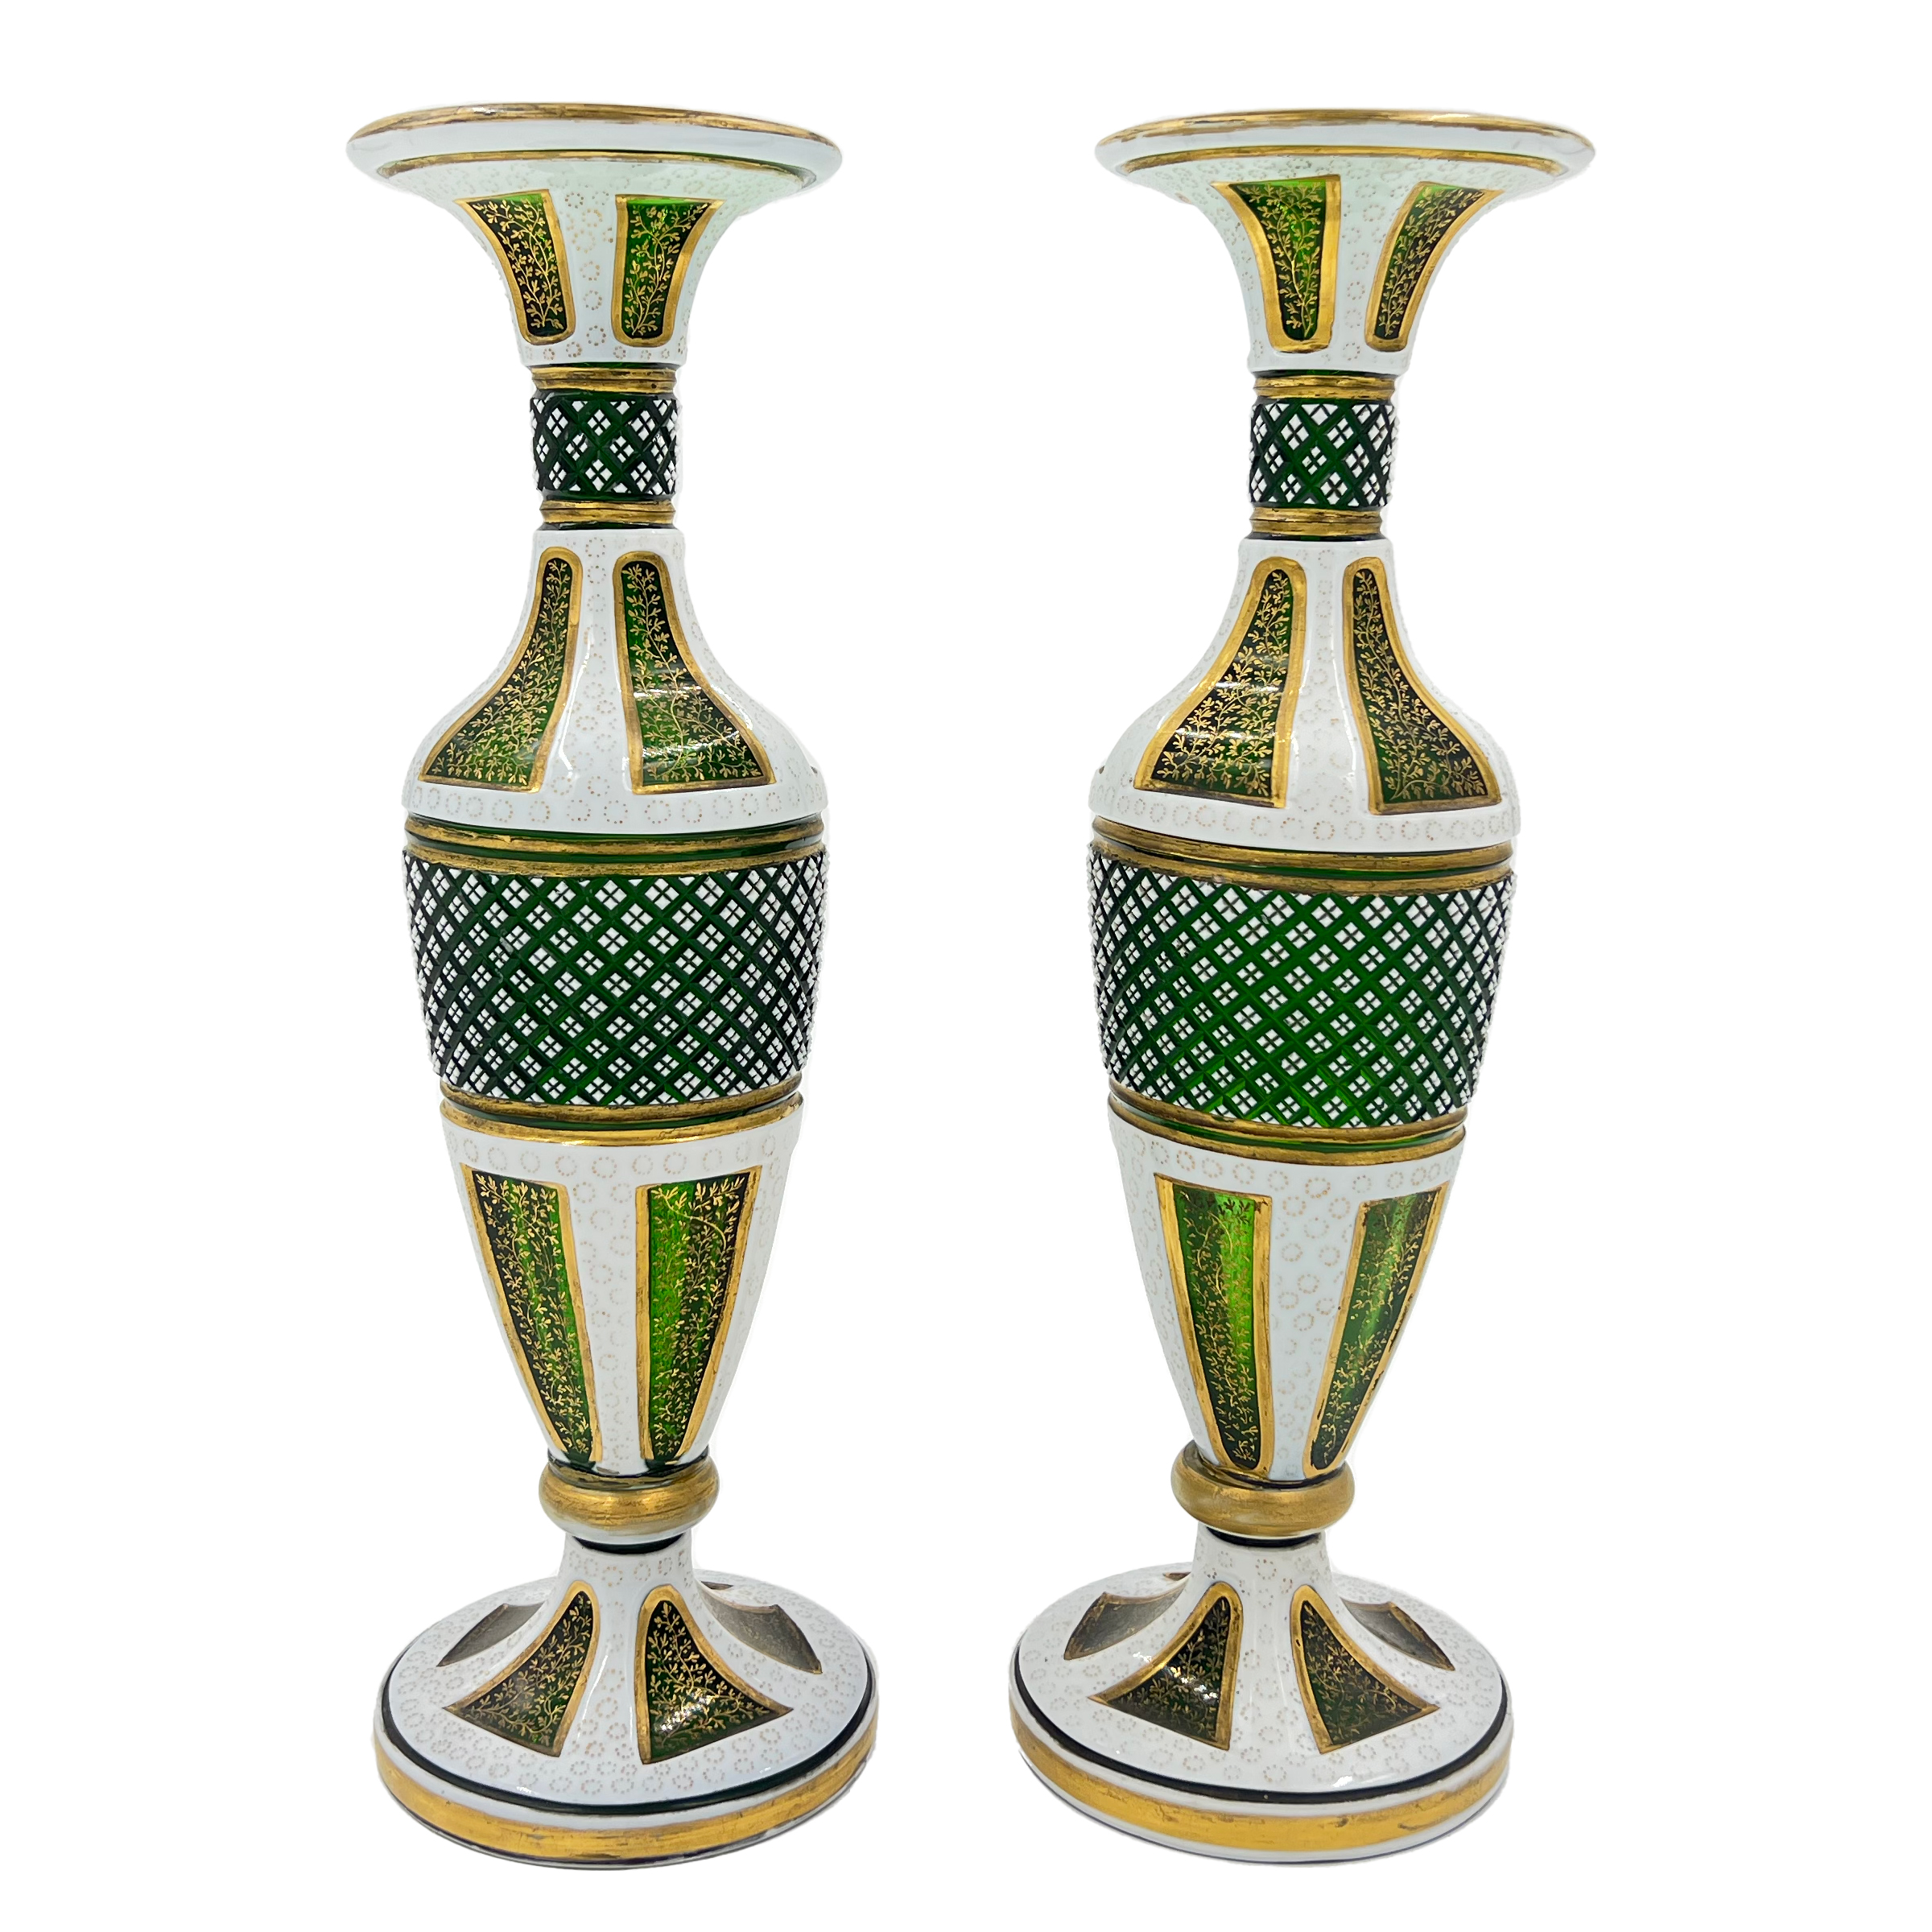 PAIR OF BOHEMIAN GLASS VASES, LATE 19TH CENTURY